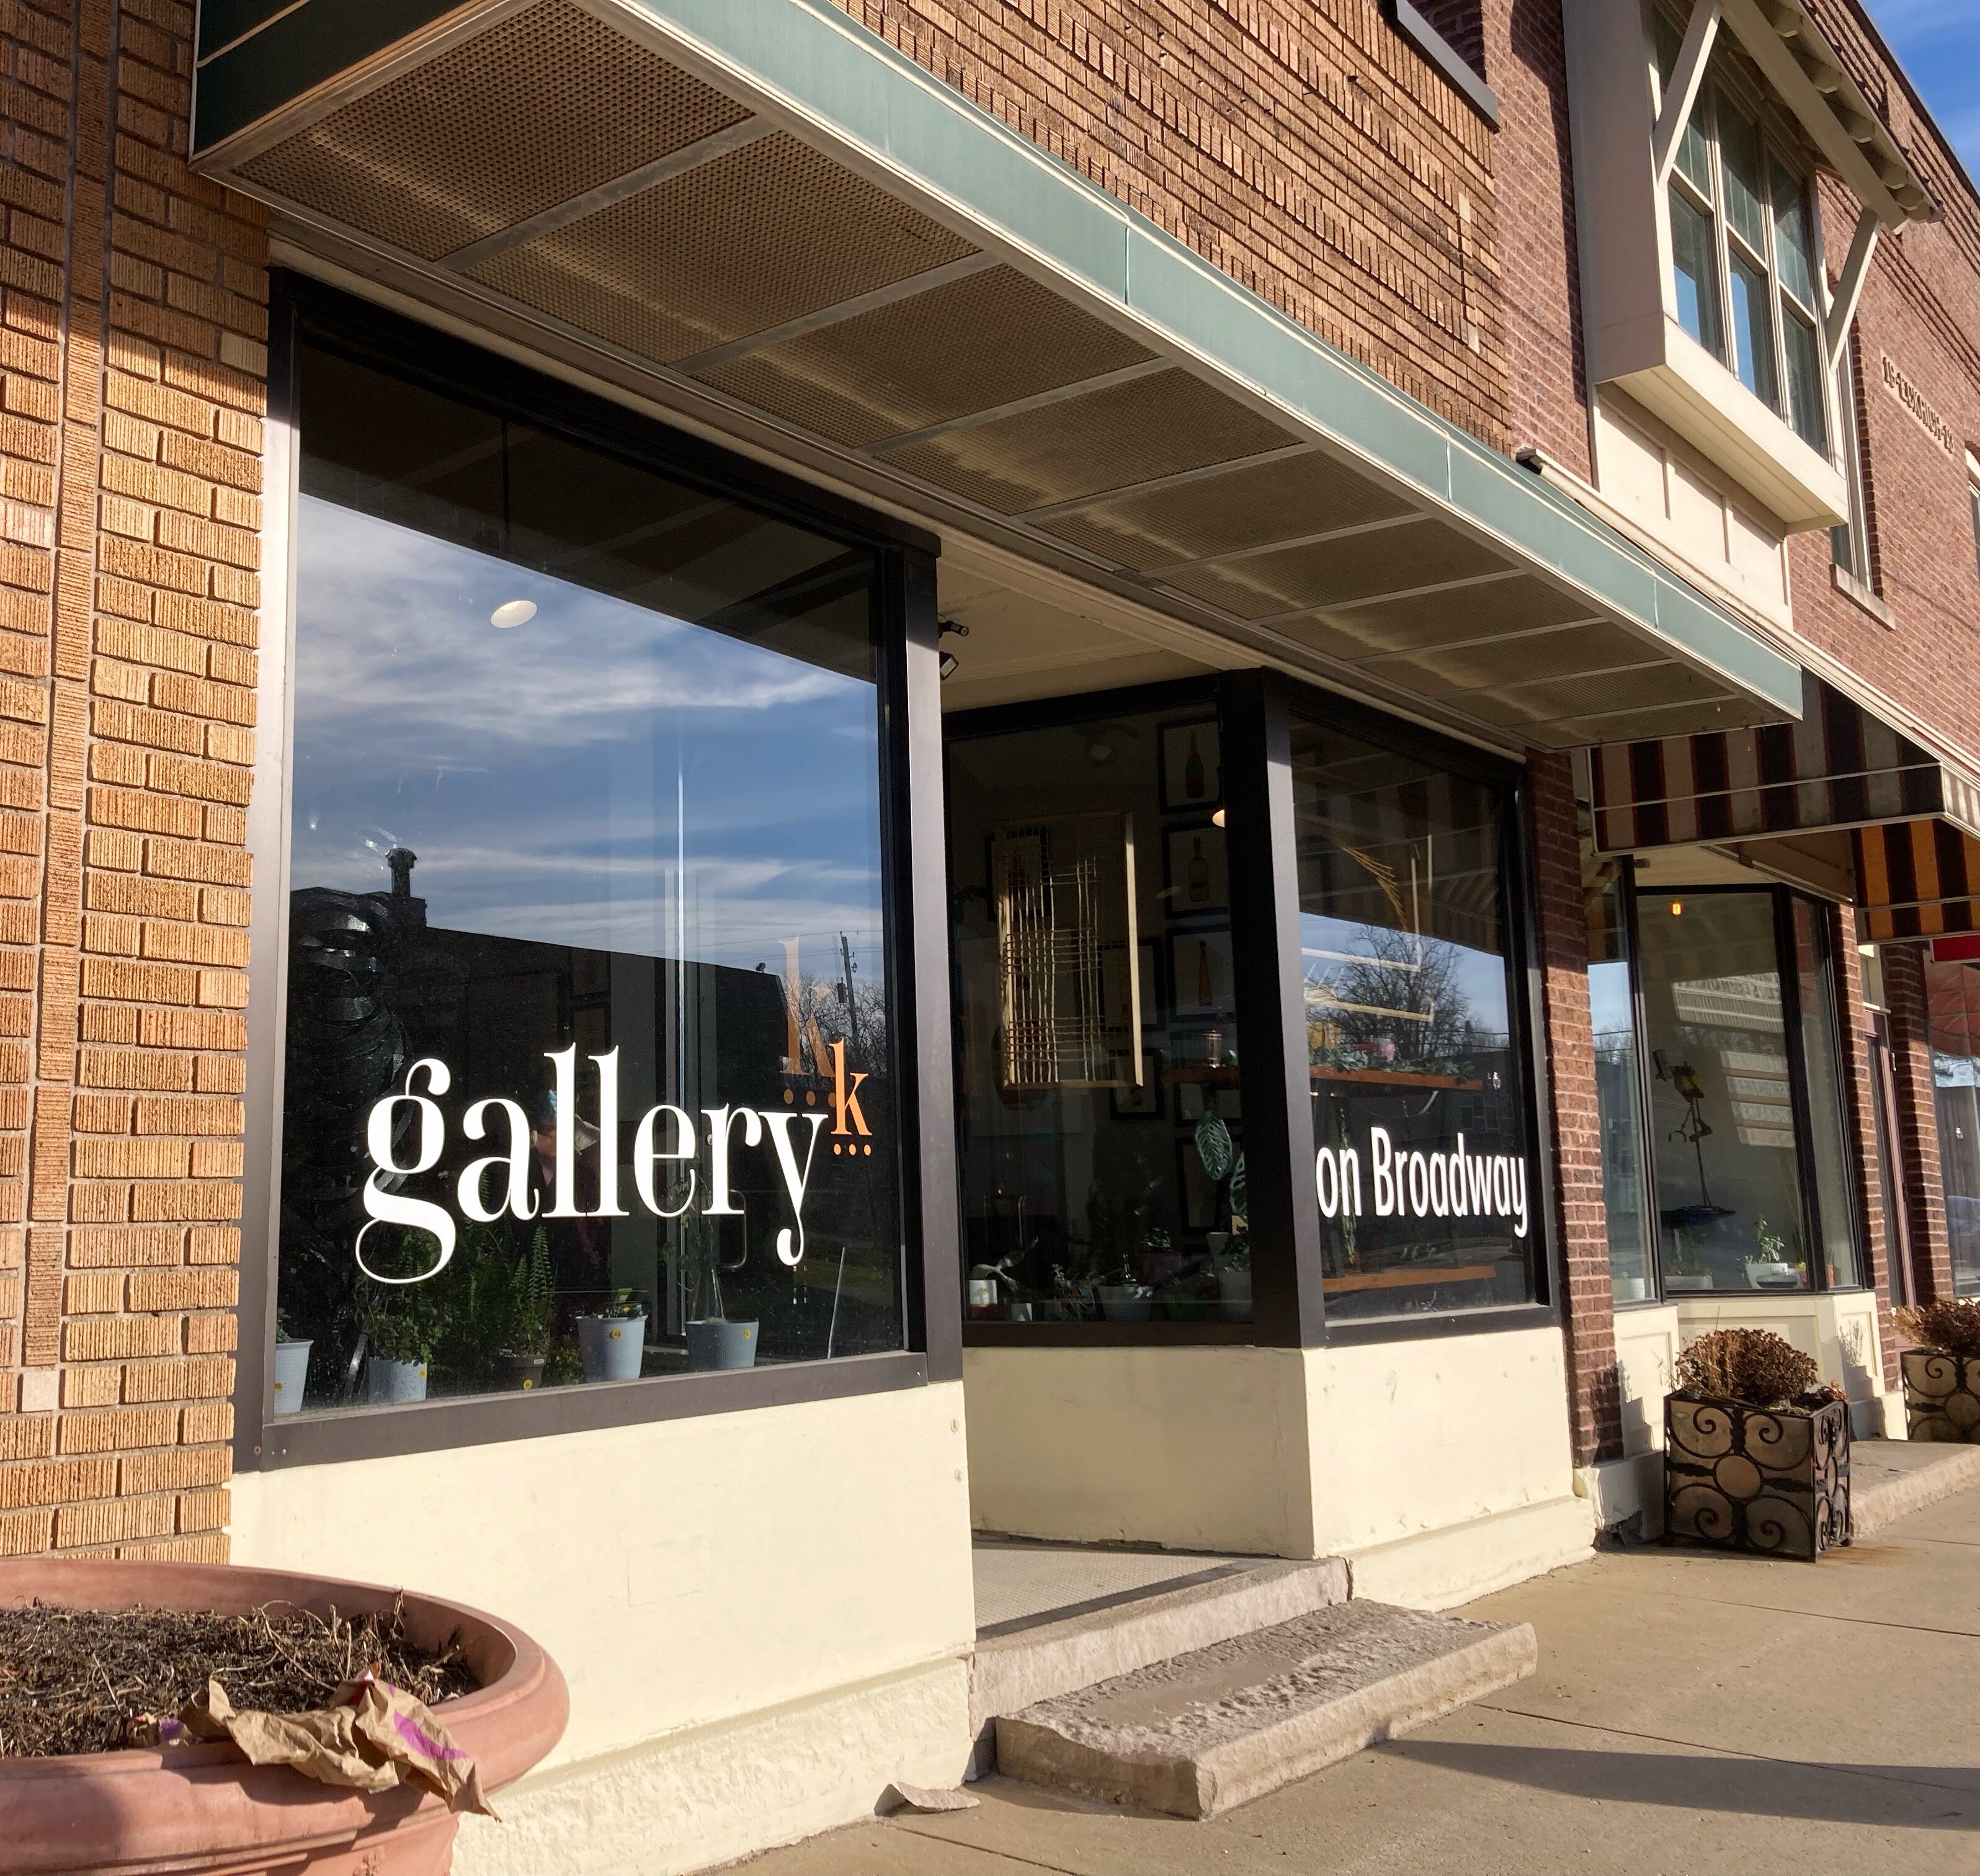 Gallery K is located at 2445 Broadway.